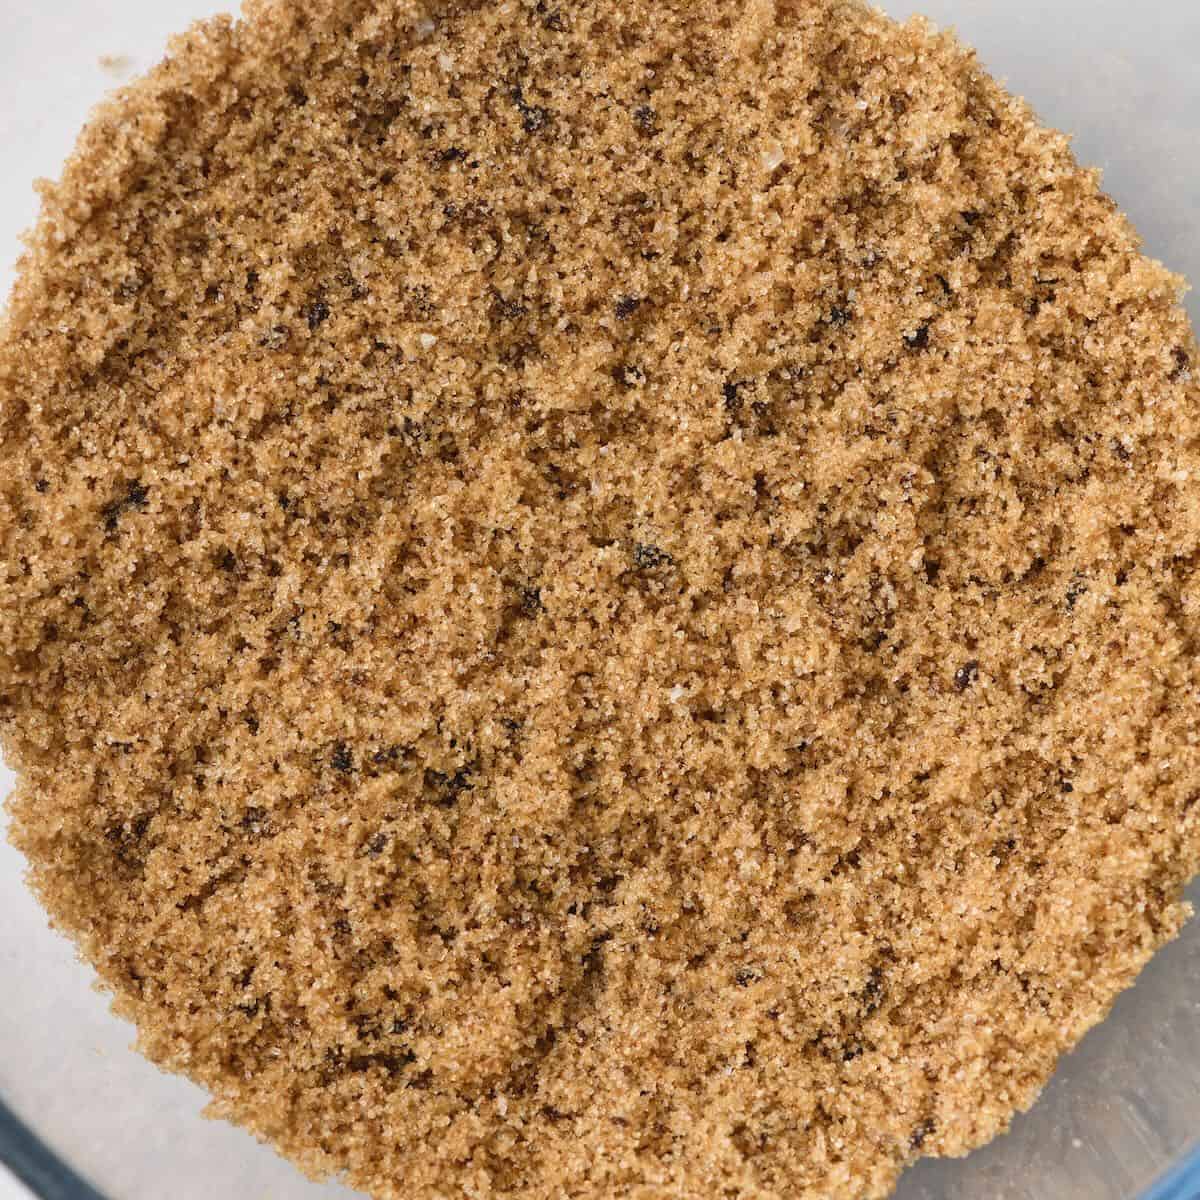 https://www.alphafoodie.com/wp-content/uploads/2022/01/How-to-Make-Brown-Sugar-Square.jpeg